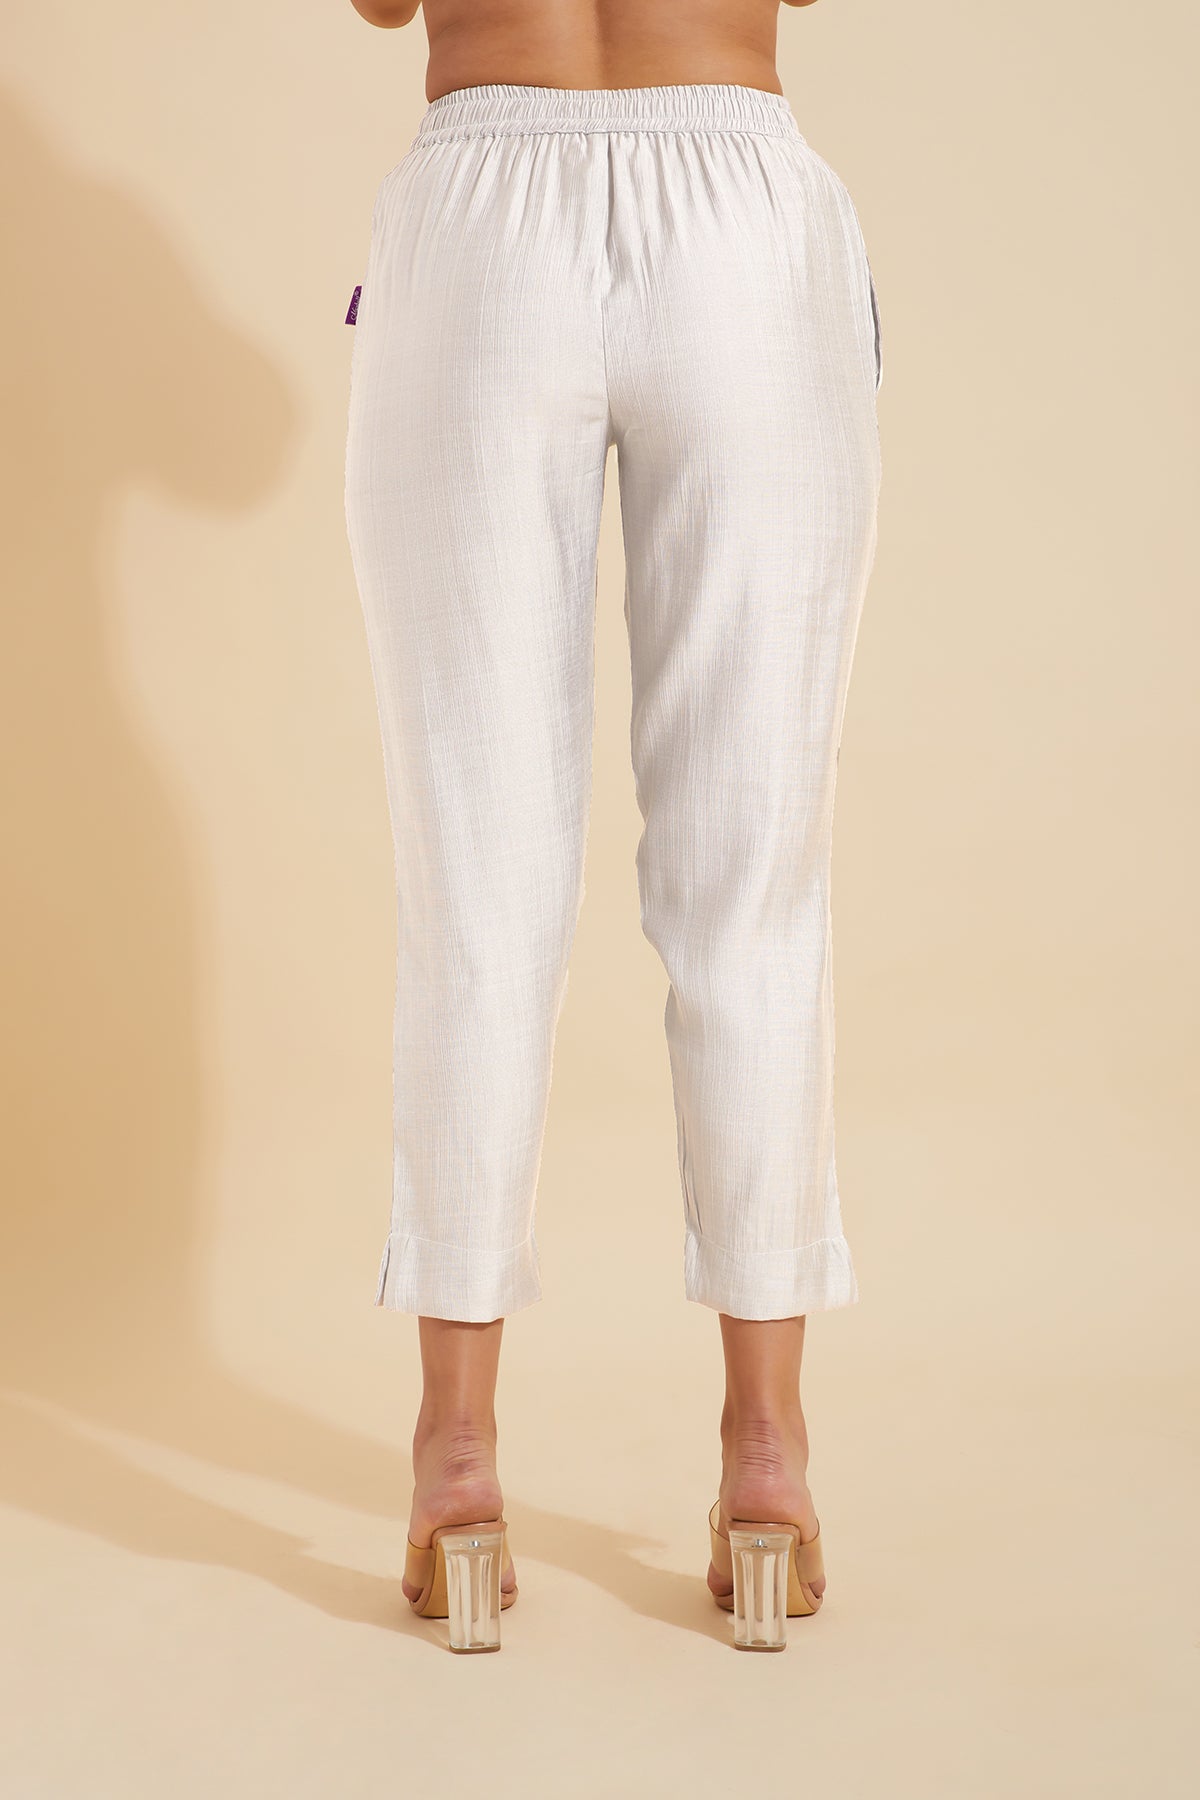 Solid Straight Pant - White